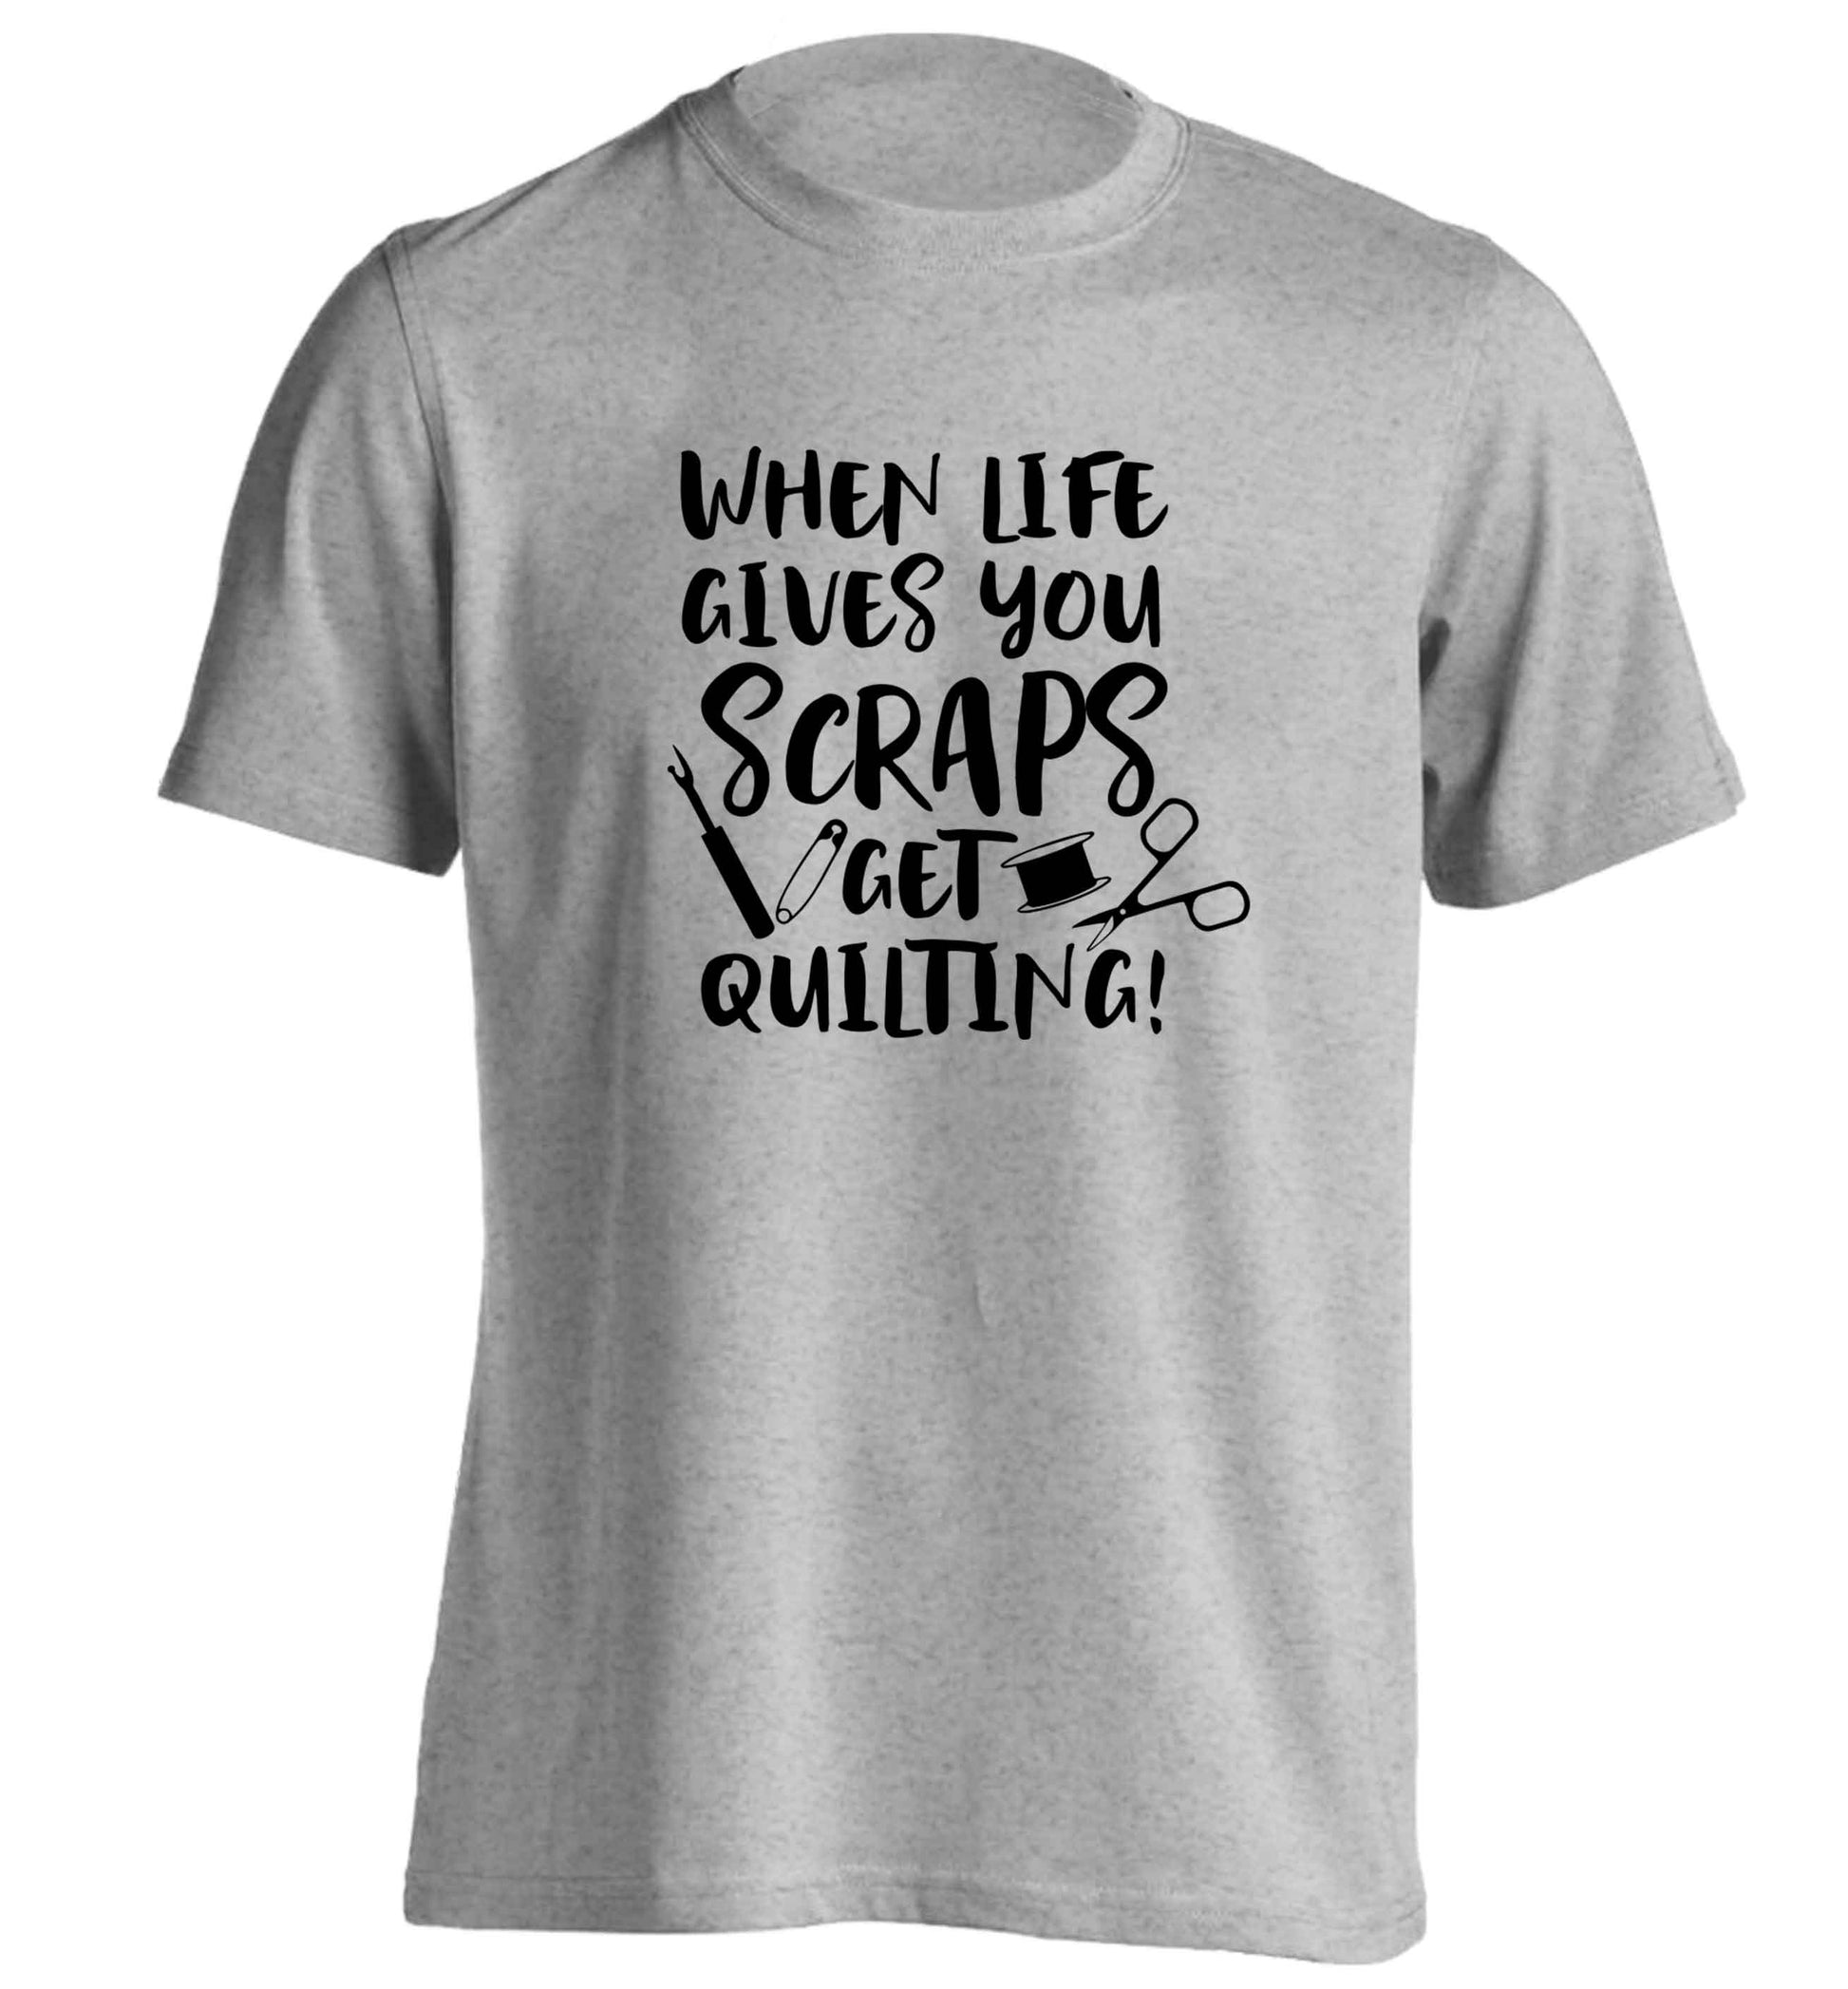 When life gives you scraps get quilting! adults unisex grey Tshirt 2XL